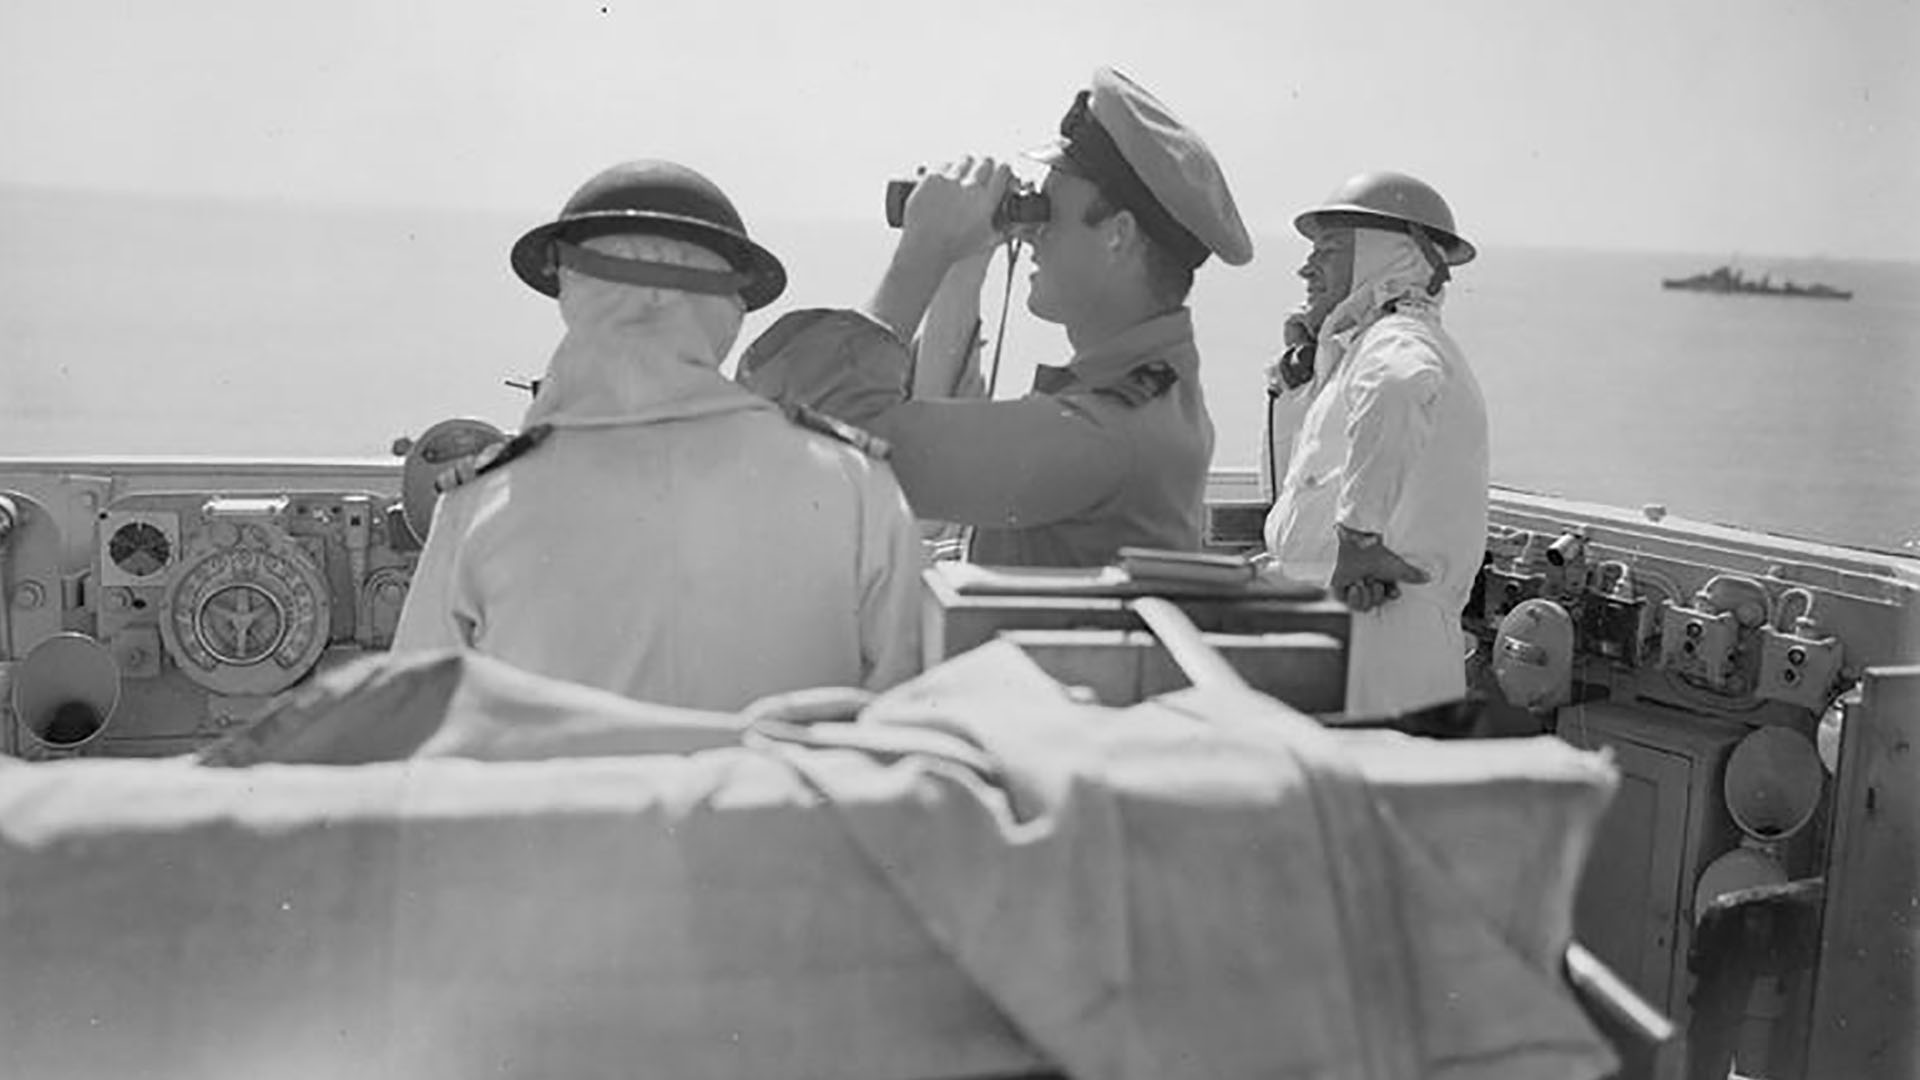 Captain Packer on H.M.S. Warspite directs the bombardment of Reggio during the opening offensive of the Italian campaign. Other crew members wear anti-flash hoods to help prevent sunburn.